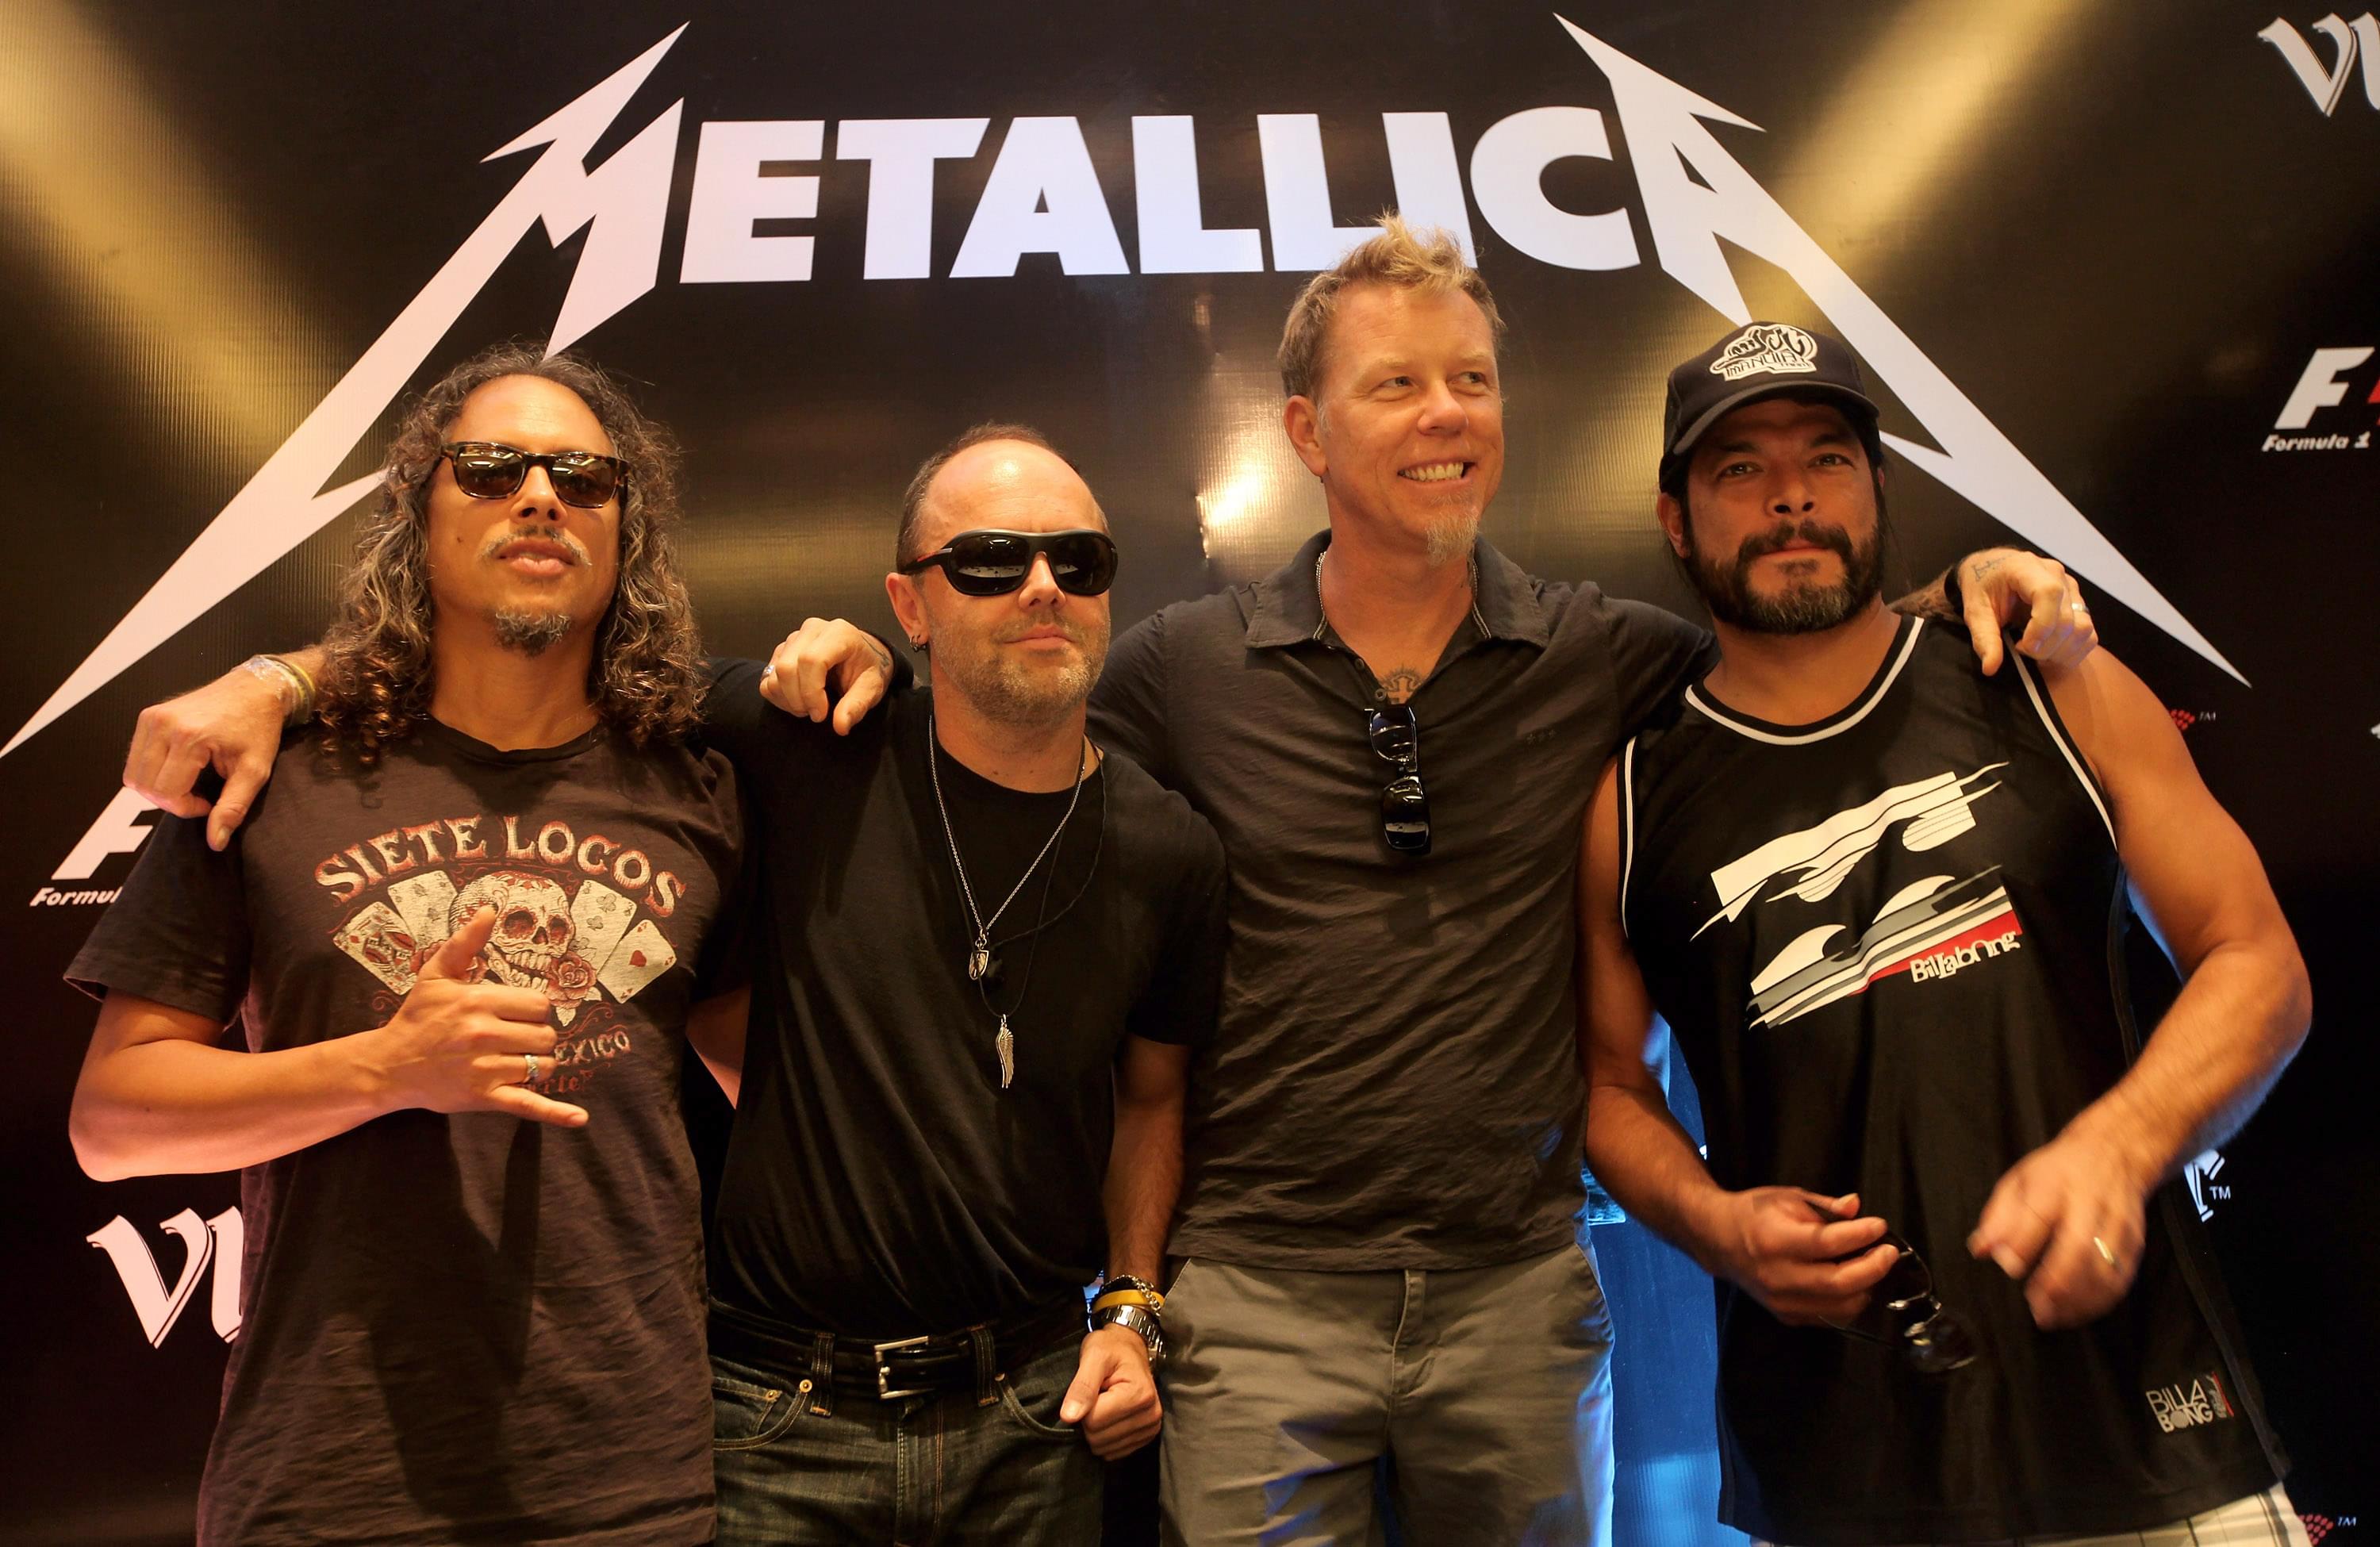 Watch Metallica Perform ‘Master of Puppets’ In Its Entirety [VIDEO]